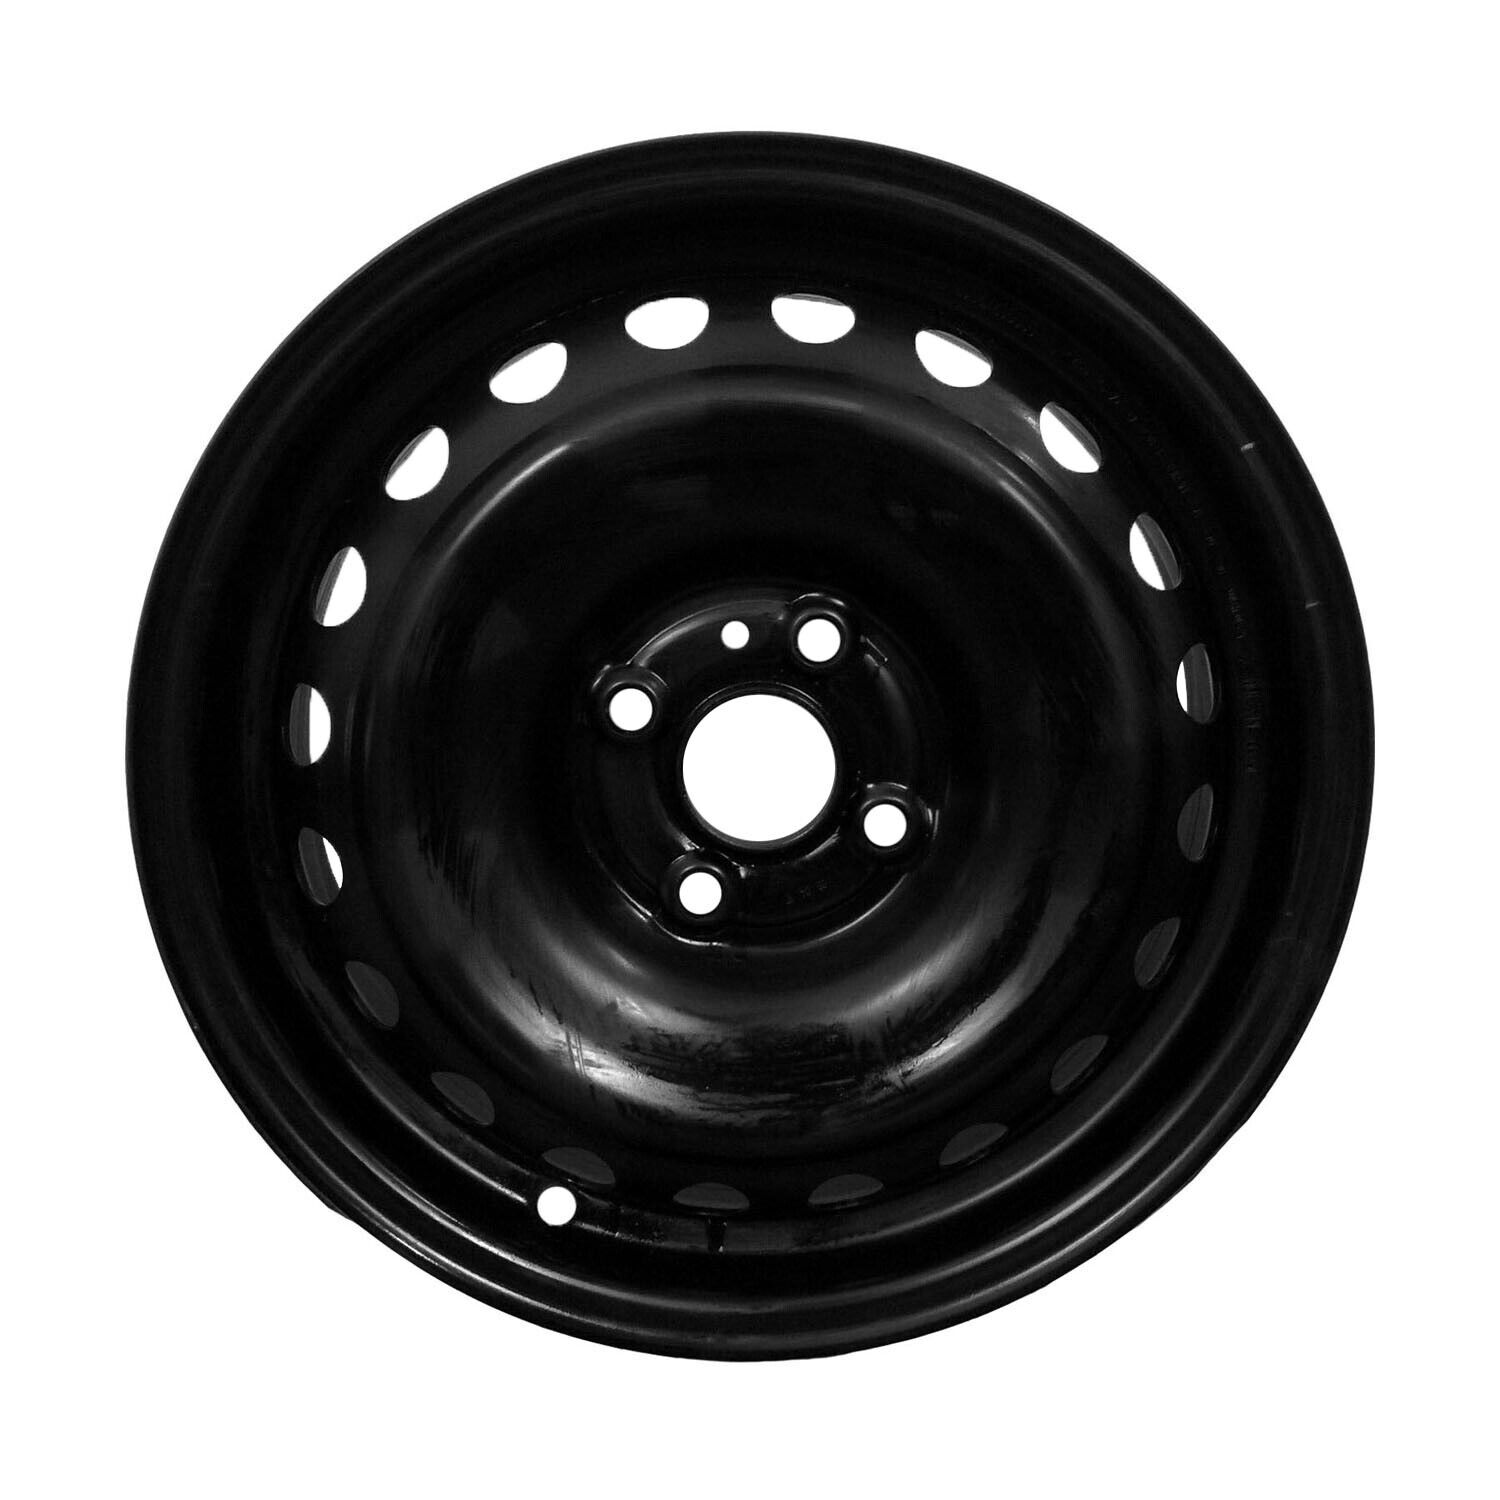 70923 Reconditioned OEM Black Steel Wheel 15x5.5 fits 2018-2020 Hyundai Accent